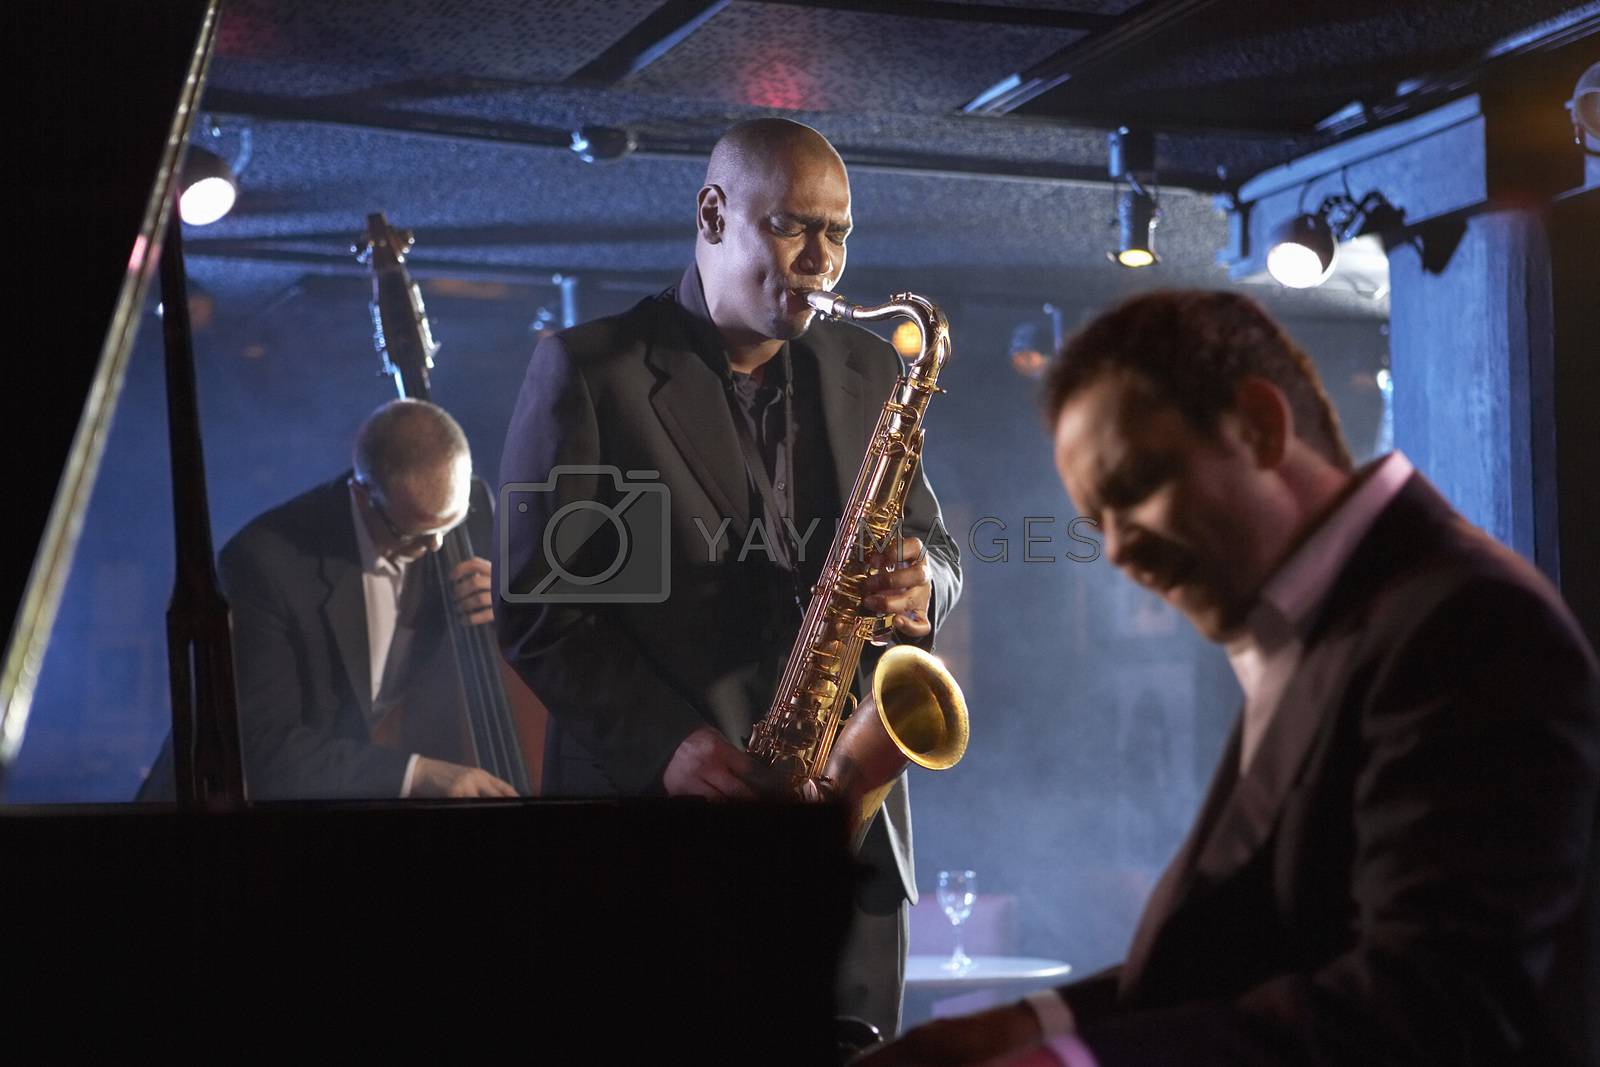 Royalty free image of Jazz band on stage group portrait by moodboard